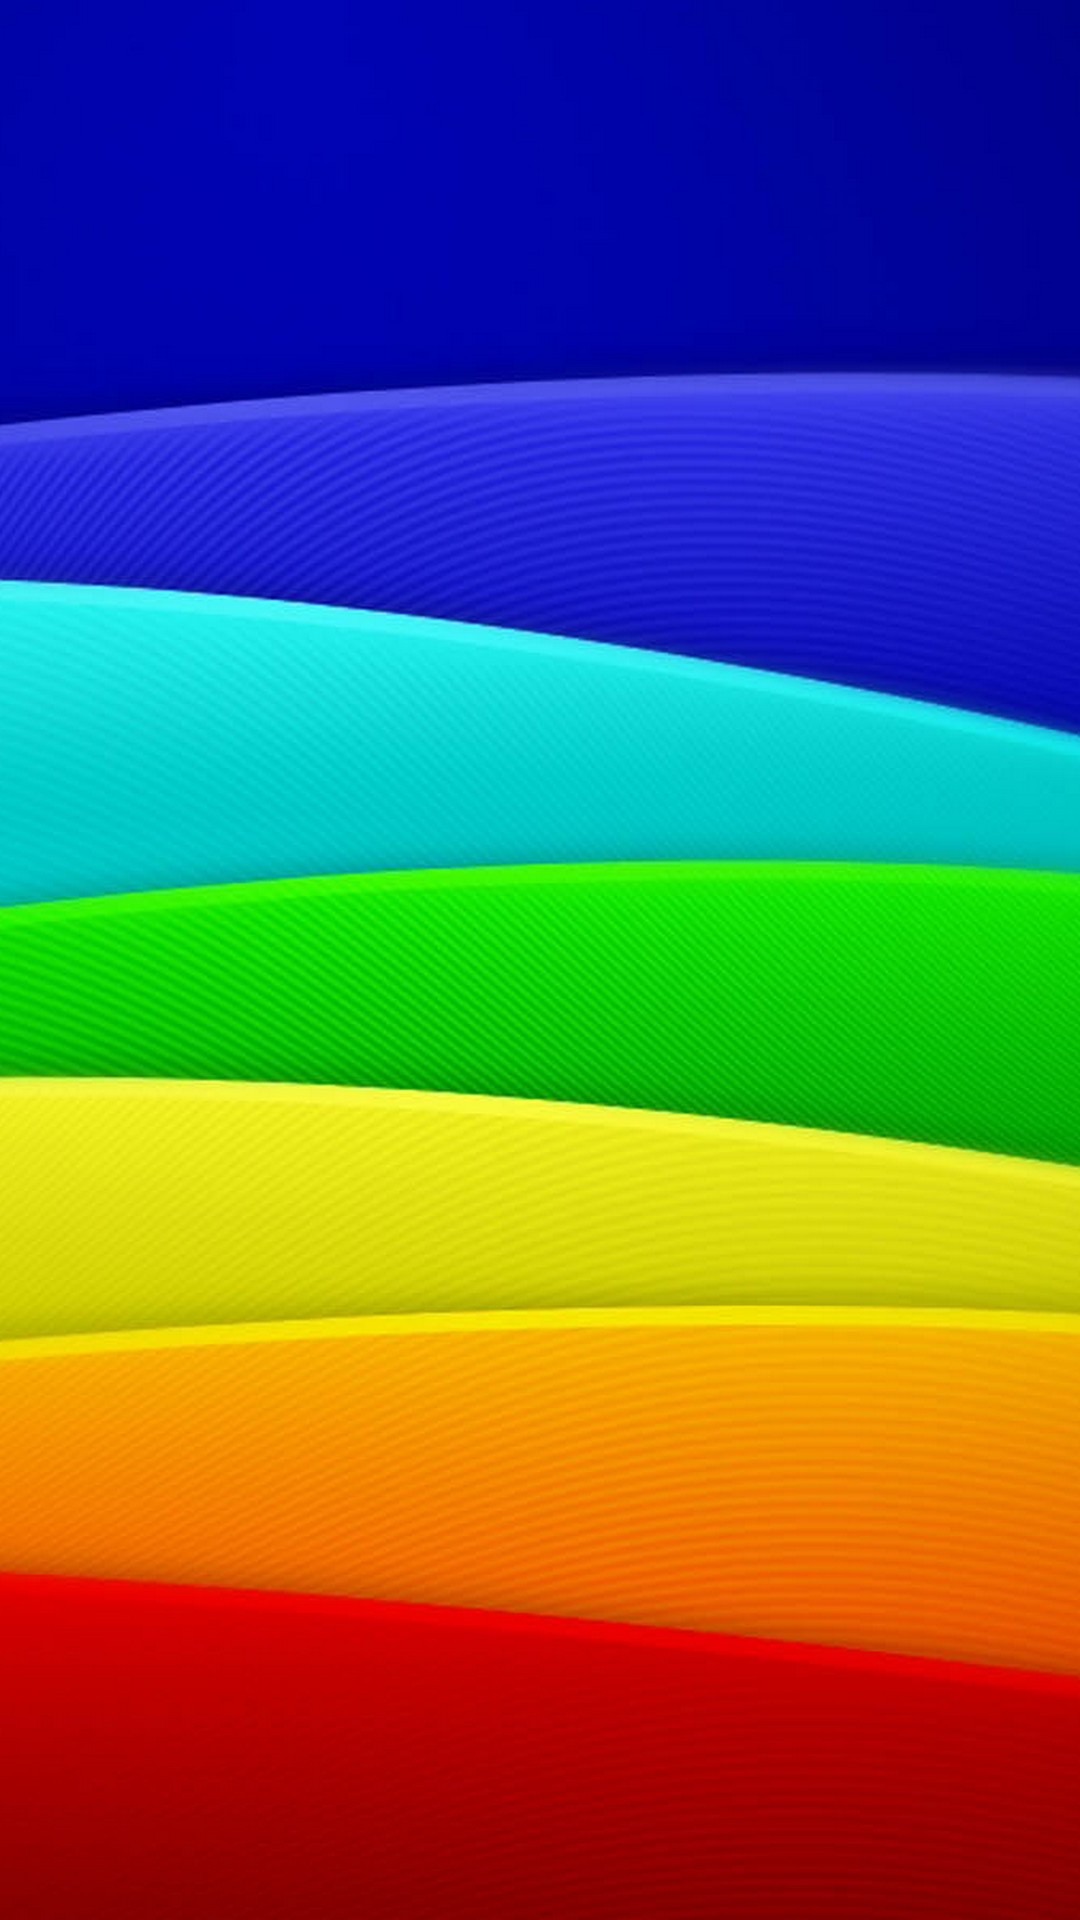 Rainbow Backgrounds For Android with image resolution 1080x1920 pixel. You can make this wallpaper for your Android backgrounds, Tablet, Smartphones Screensavers and Mobile Phone Lock Screen